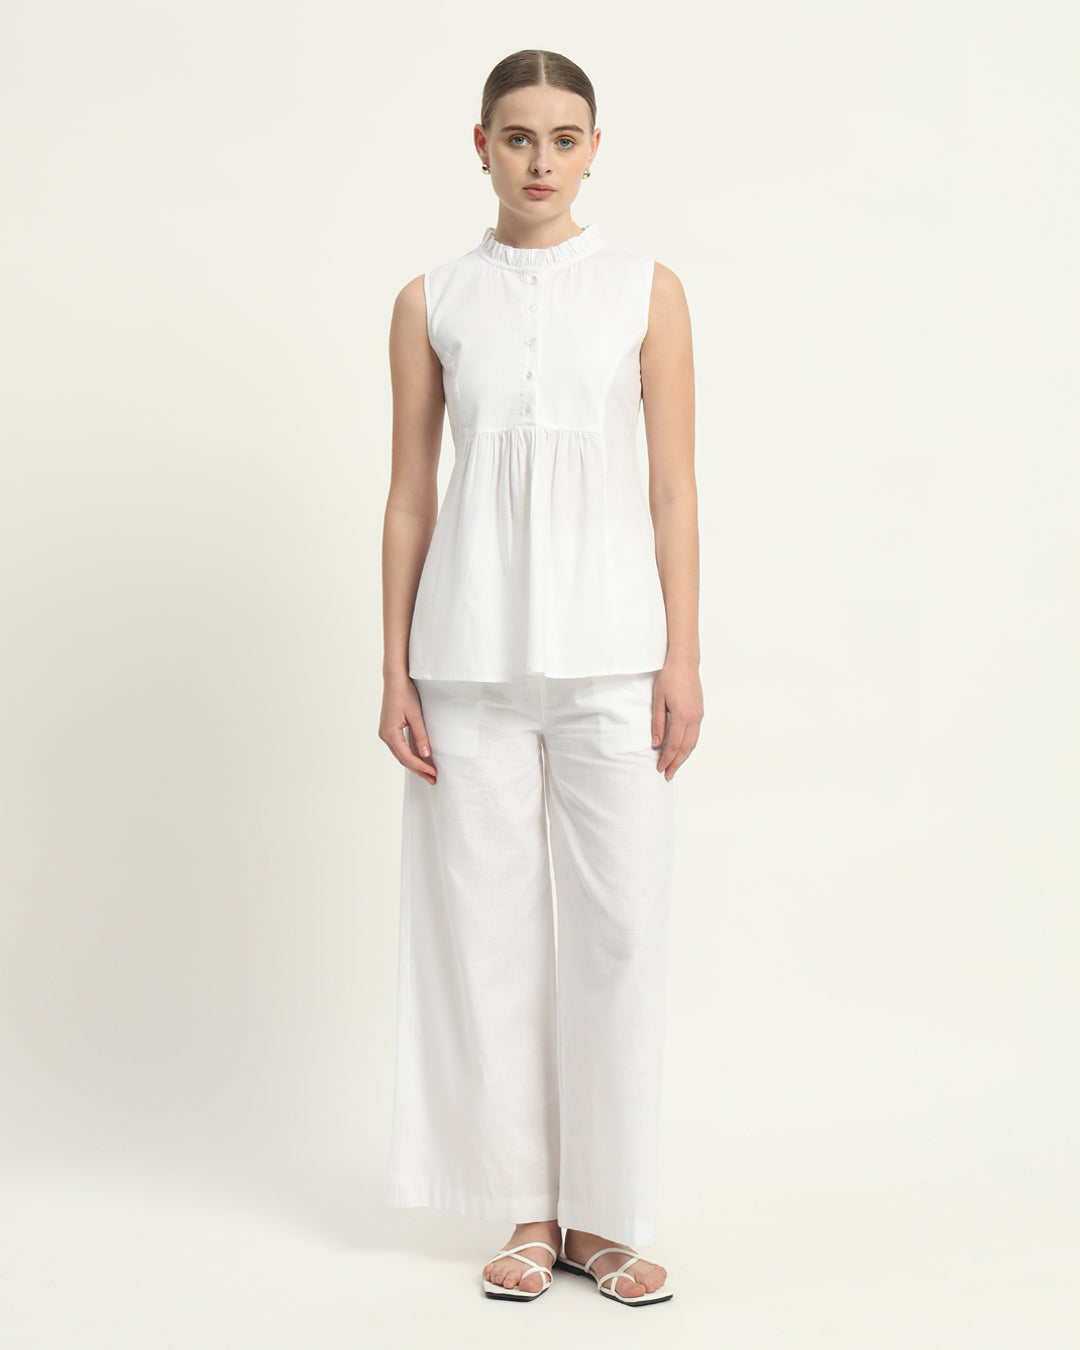 Pants Matching Set- White Frolicsome Flare